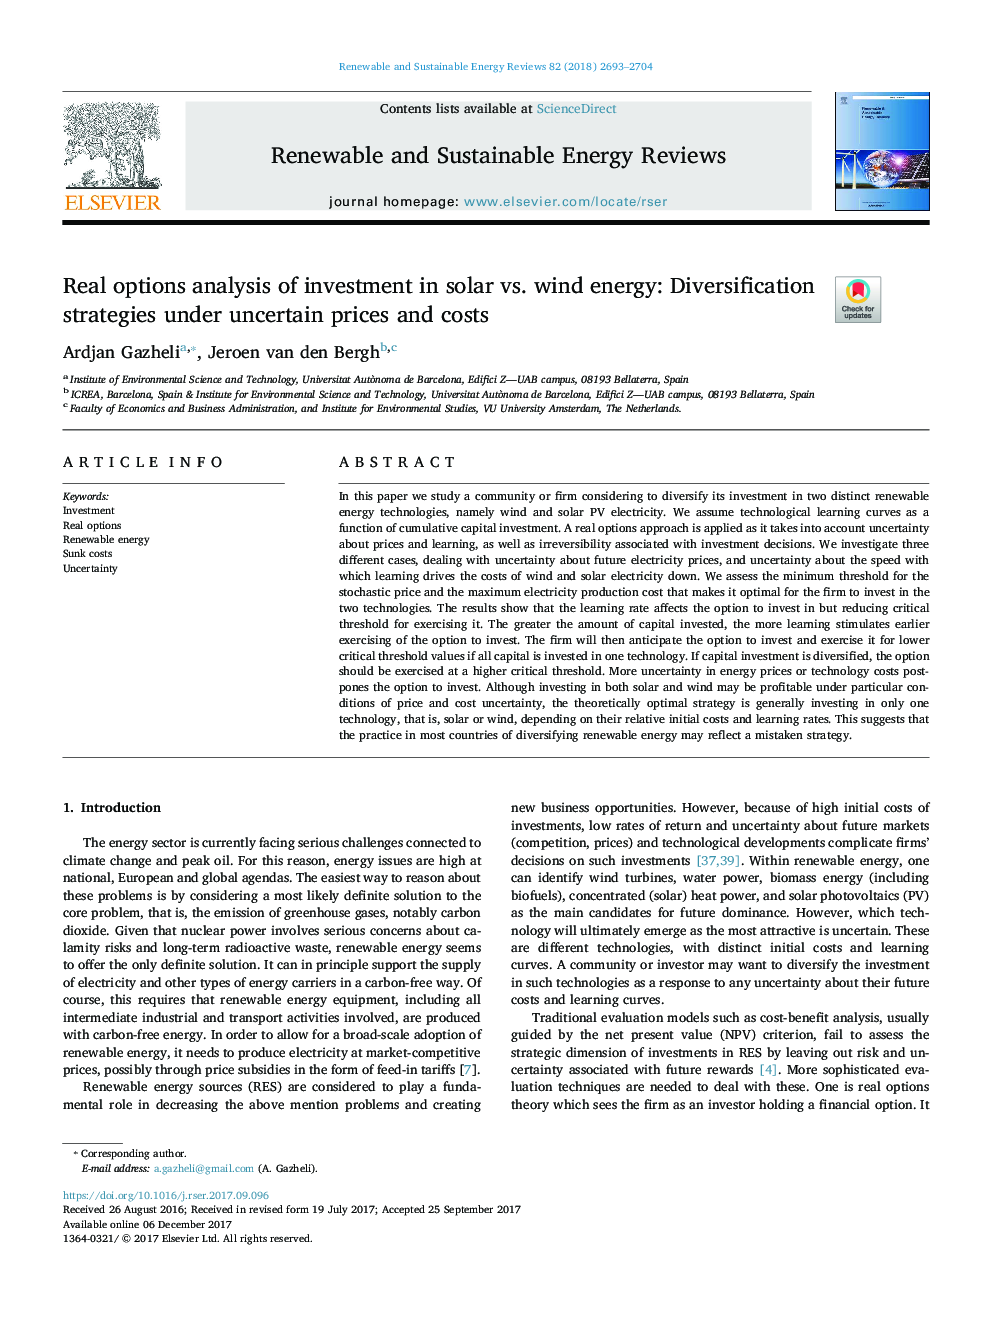 Real options analysis of investment in solar vs. wind energy: Diversification strategies under uncertain prices and costs